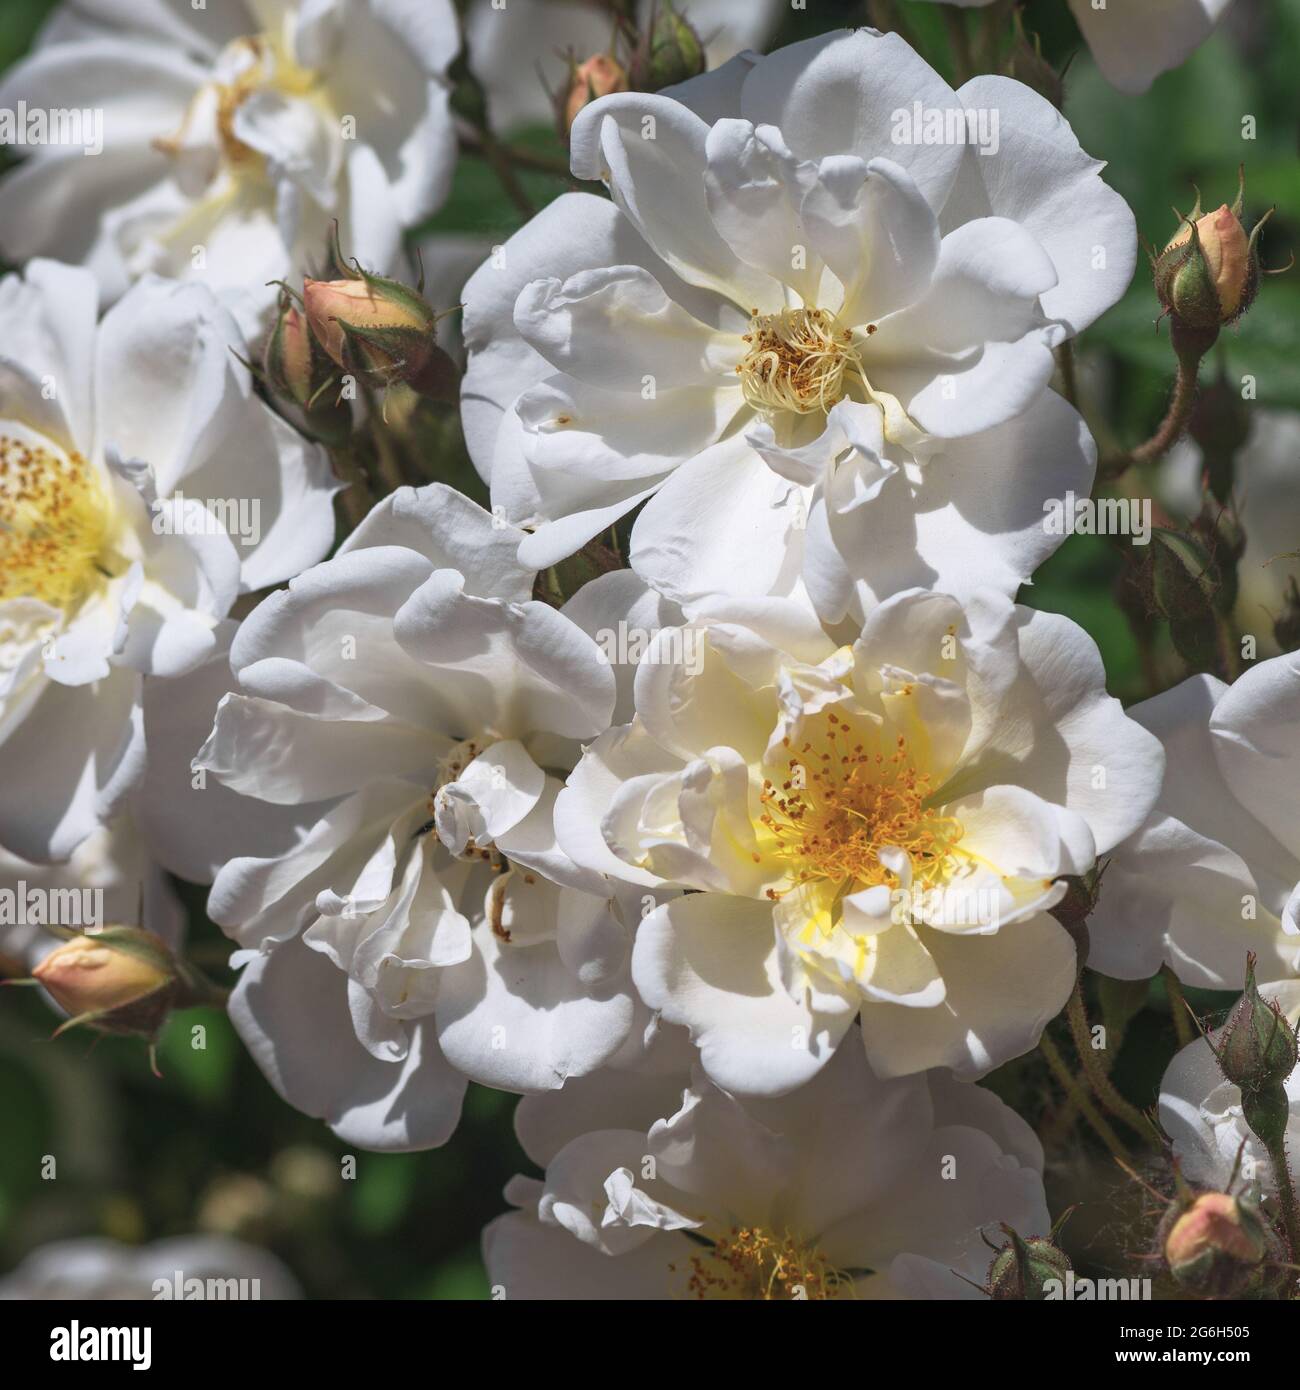 Rose Iceberg - white, flat, cupped, medium-double (25-35 petals) flowers, with a mild aroma, in numerous inflorescences. Stock Photo